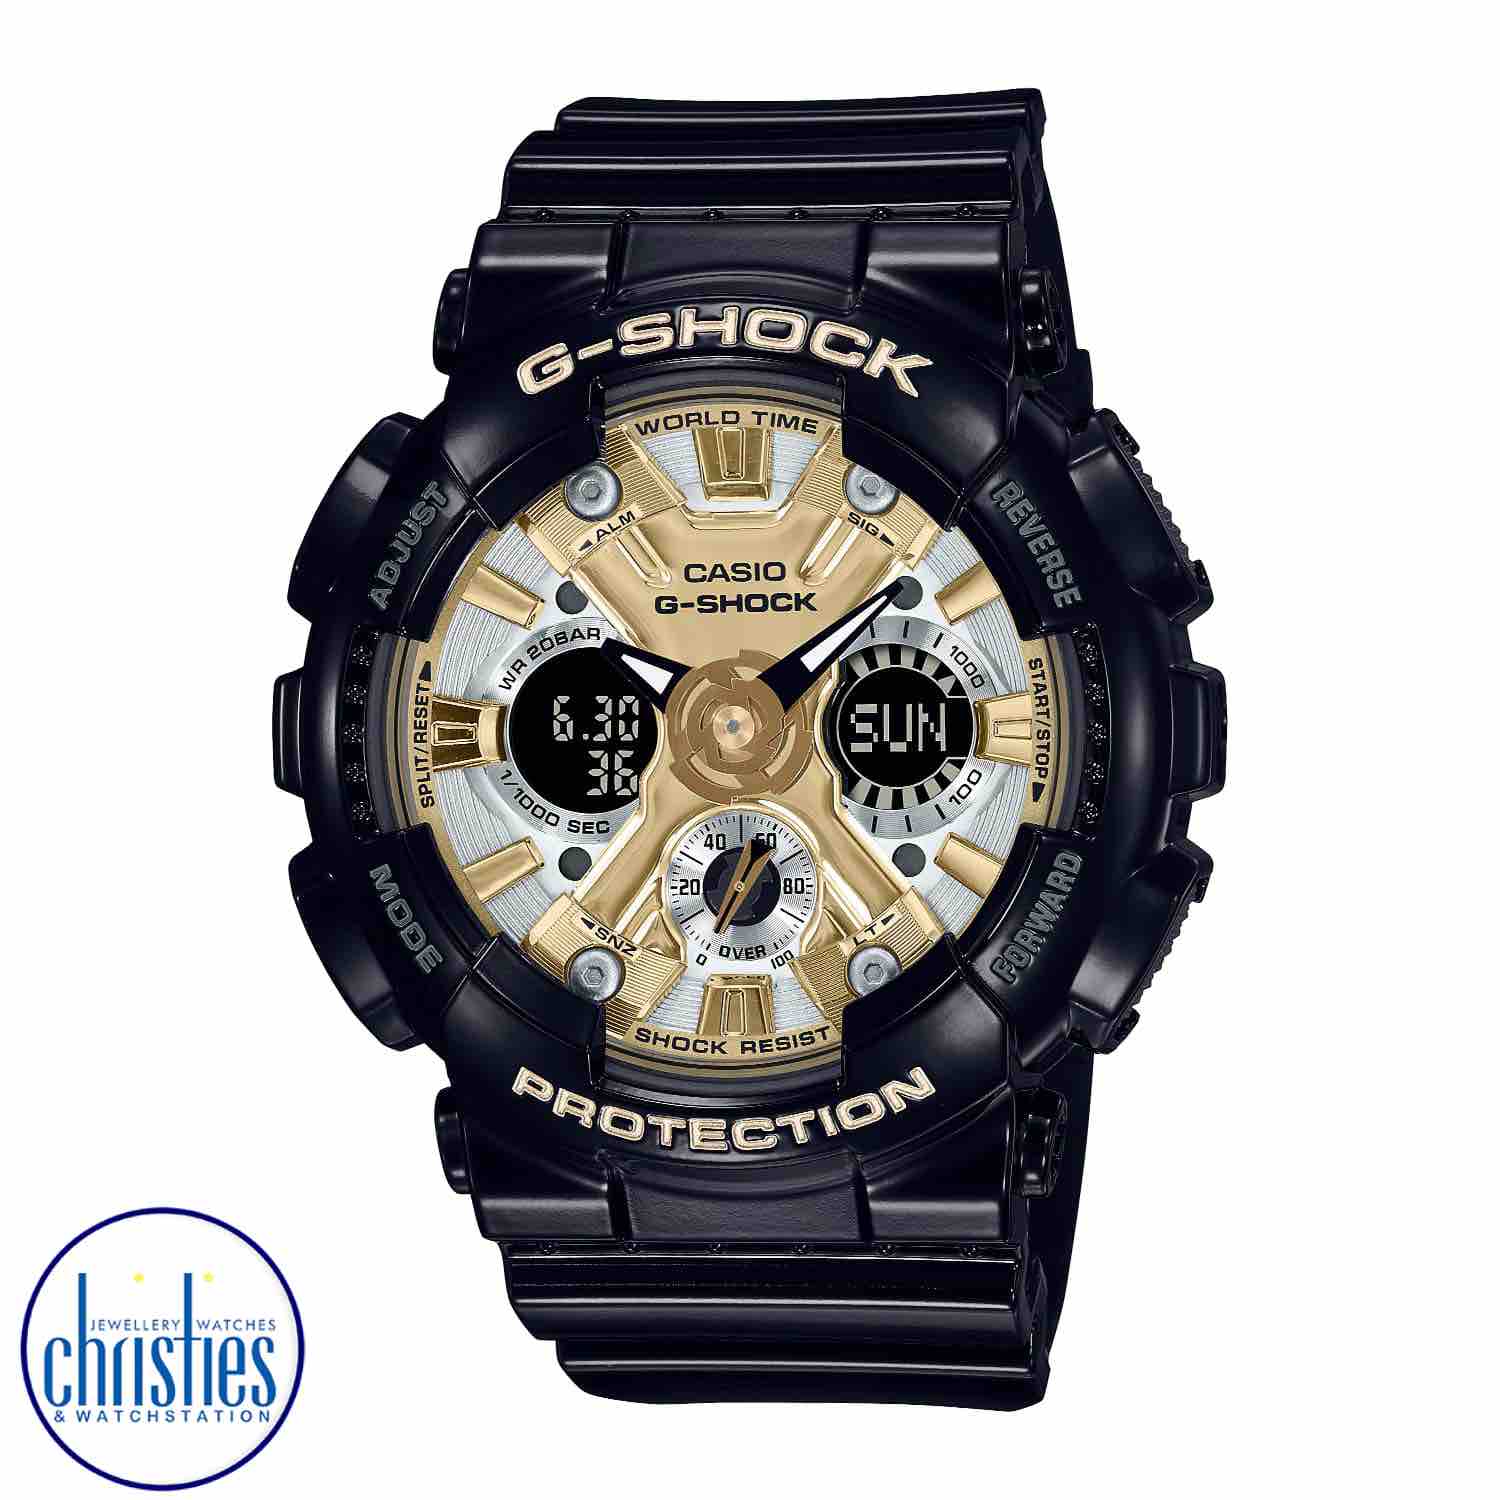 GMAS120GB-1A G-SHOCK  Womens Black Gold Watch. Enjoy the iconic oversized GA-110 with a watch face designed for depth and dimension and numerous fine components, all in a timepiece with a smaller profile.